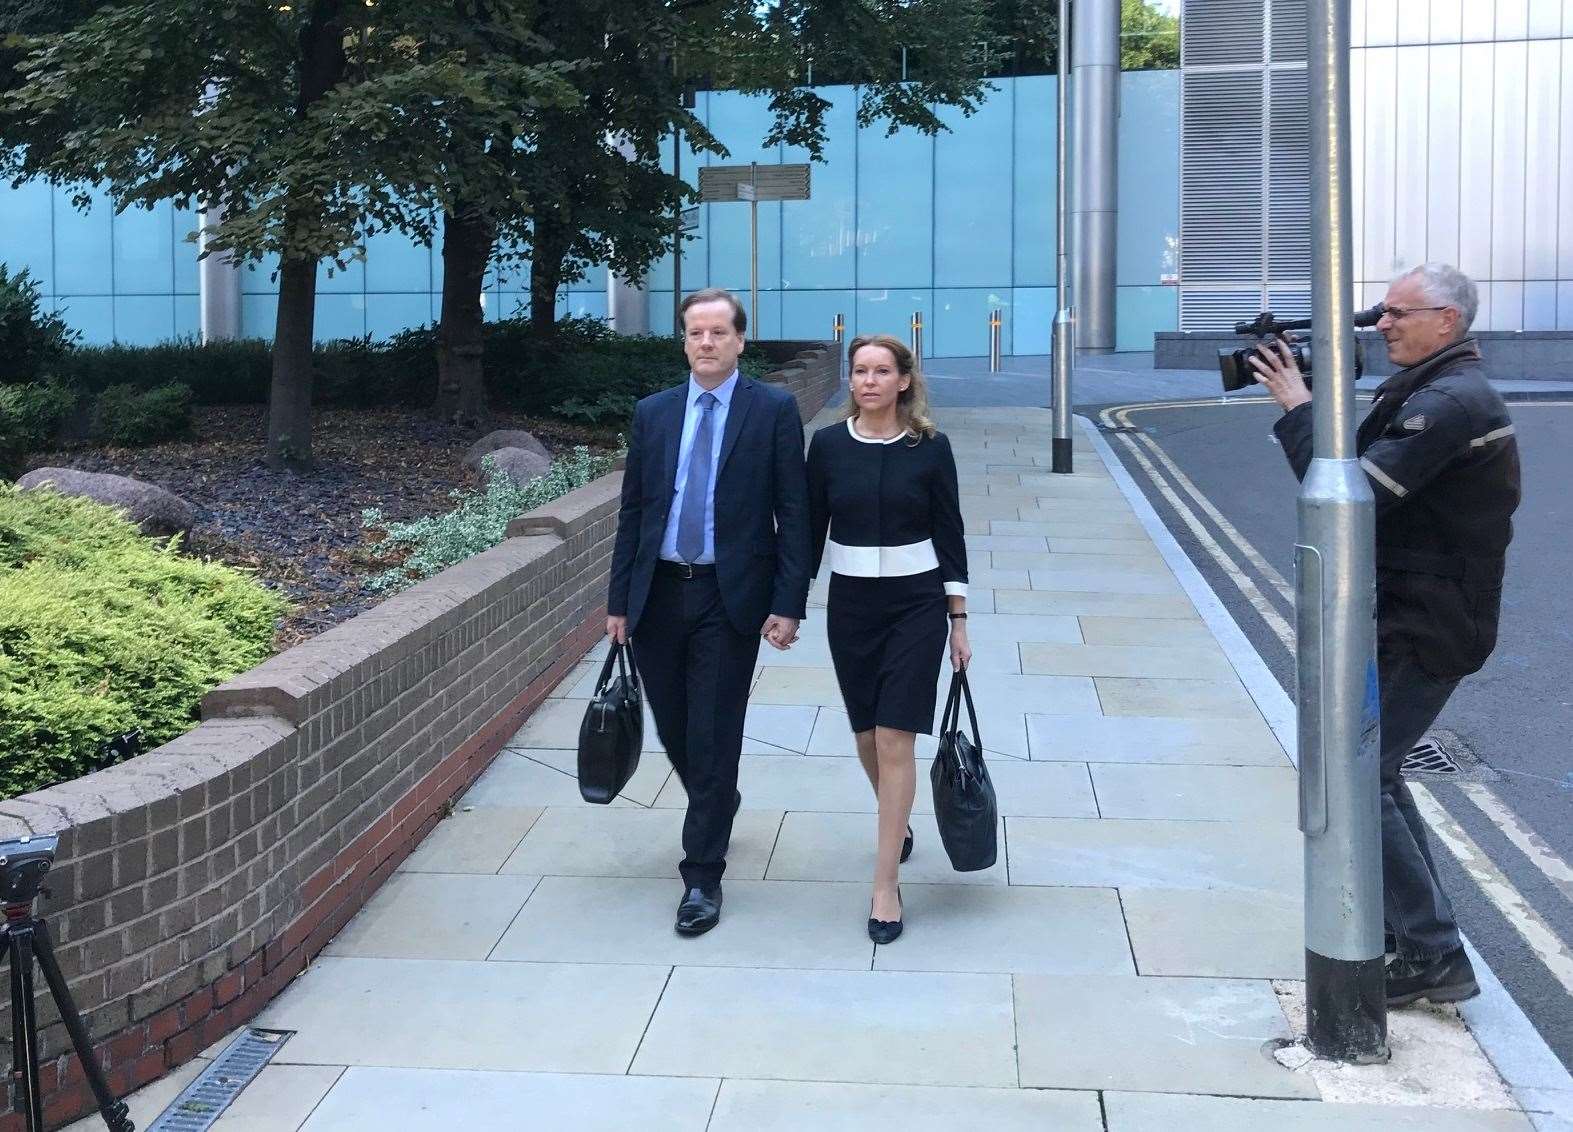 Charlie Elphicke and then-wife Natalie attended Southwark Crown Court together throughout the trial